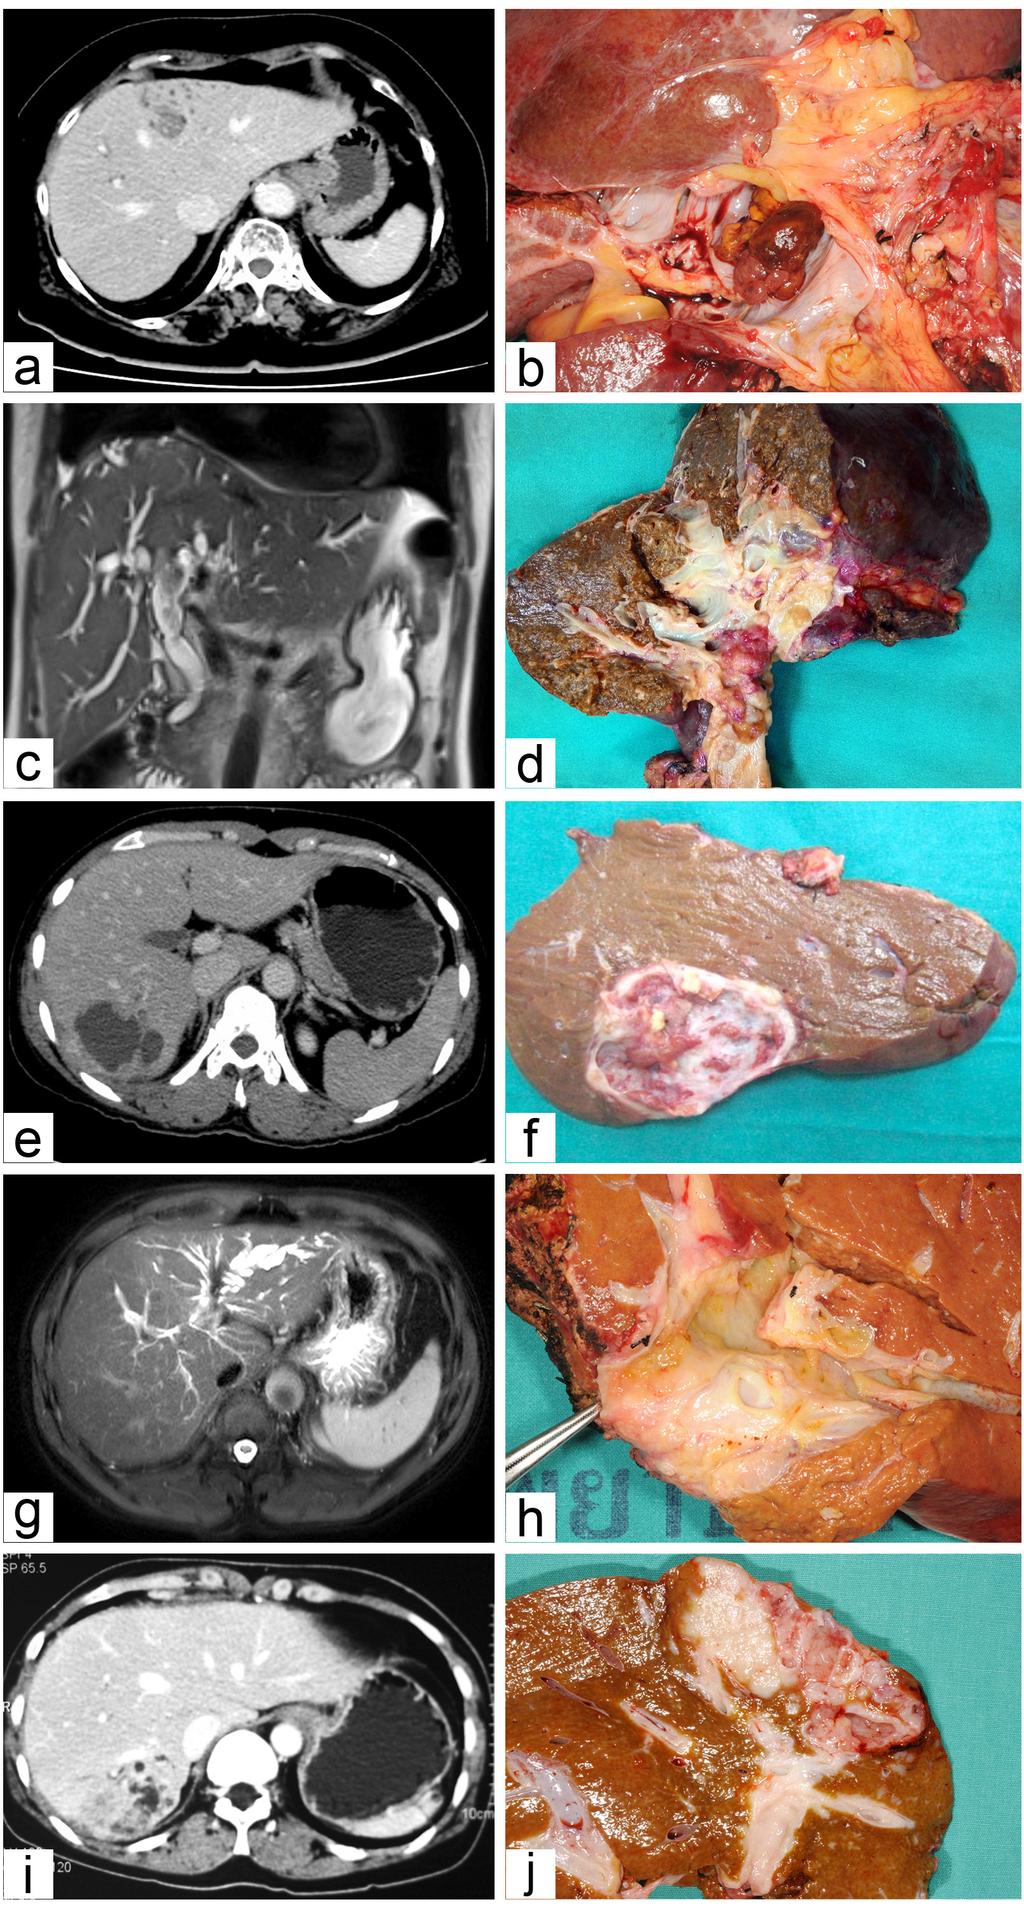 DOI:10.22034/APJCP.2017.18.1.207 Figure 1. Photograph of Preoperative Imaging and Surgical Specimens of Intraductal Papillary Neoplasm of the Bile Duct according to Class.